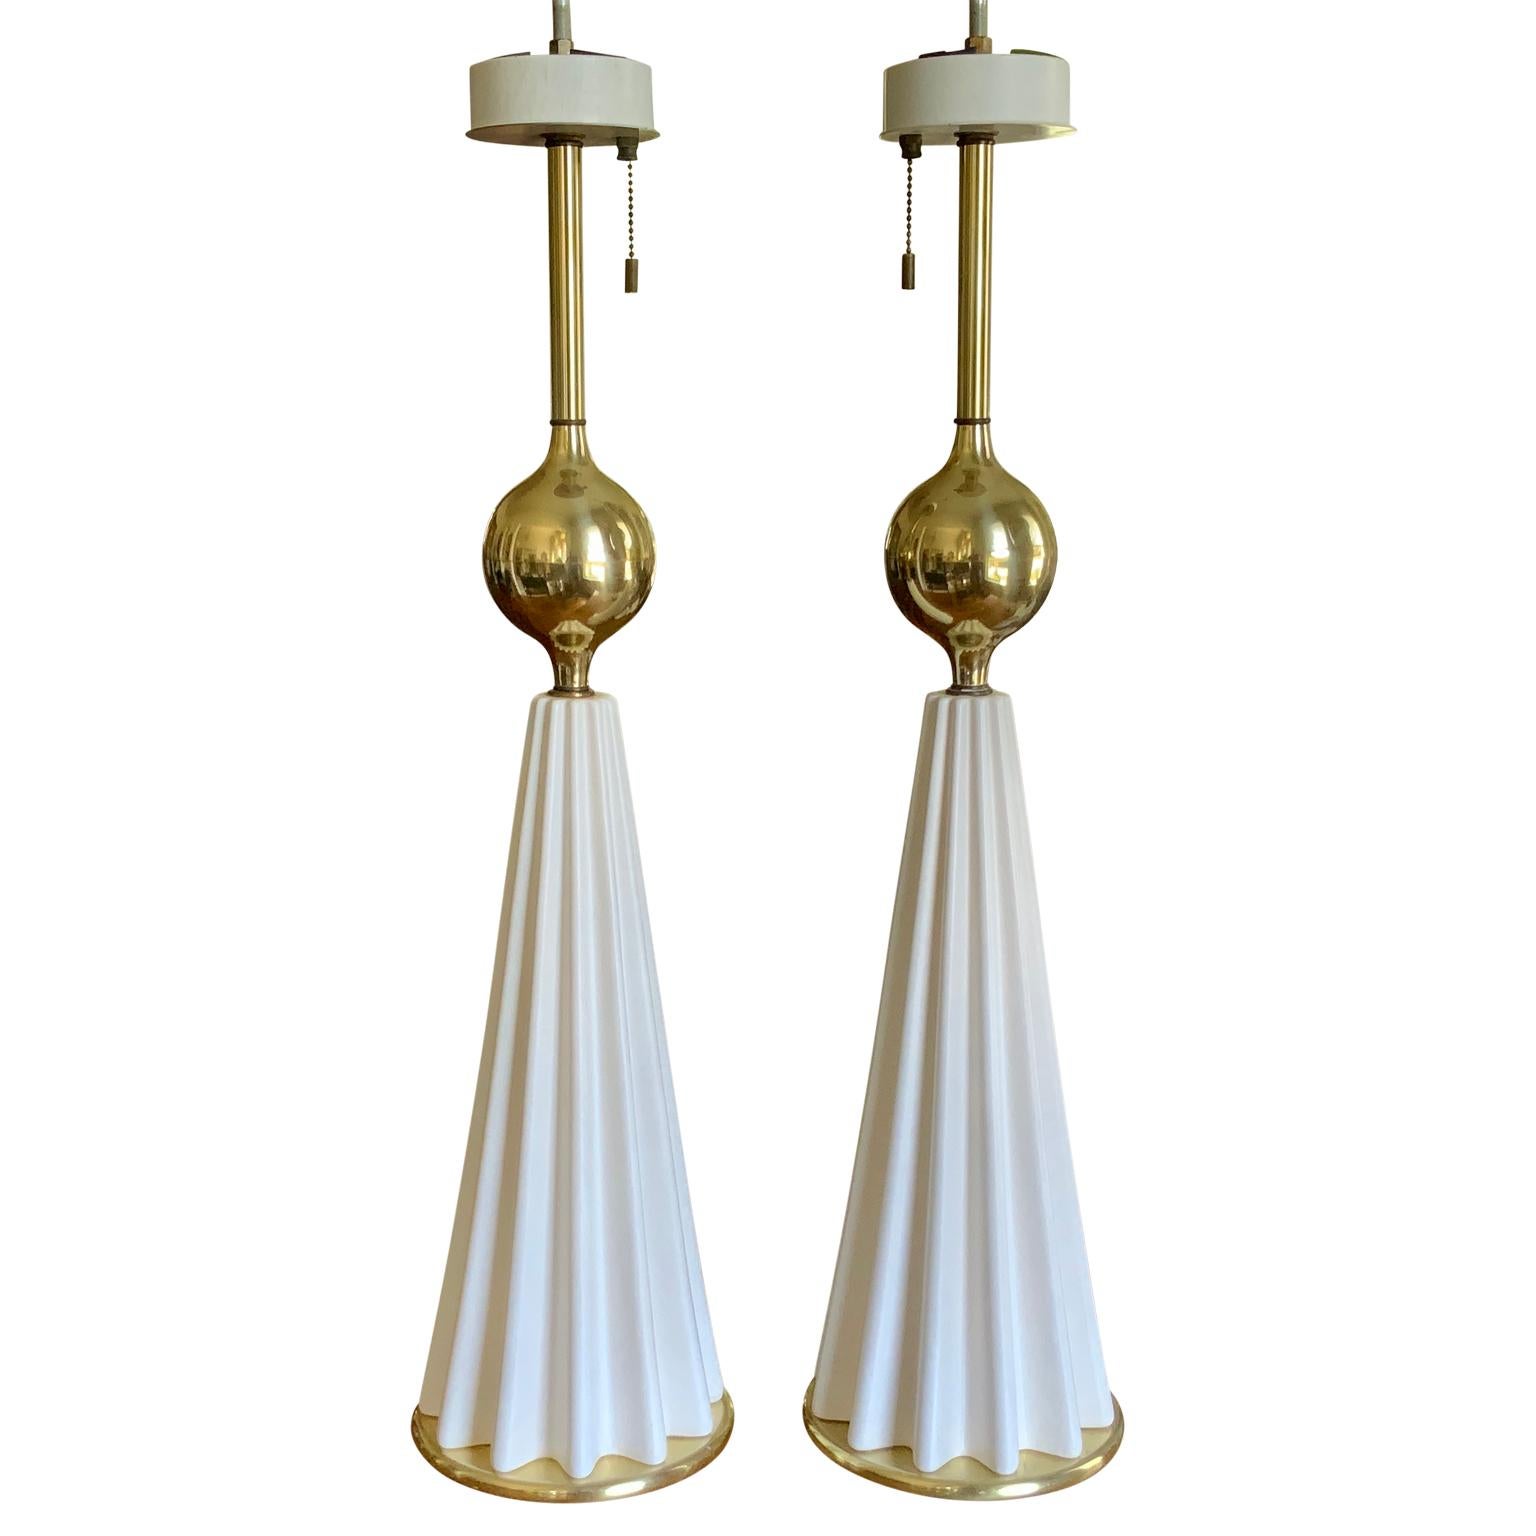 A pair of Mid-Century Modern Gerald Thurston table lamps for Lightolier
Brass ball and sculptural ribbed white ceramic on brass bases. Original brass finials. 3 sockets per lamp with original brass pull chains.